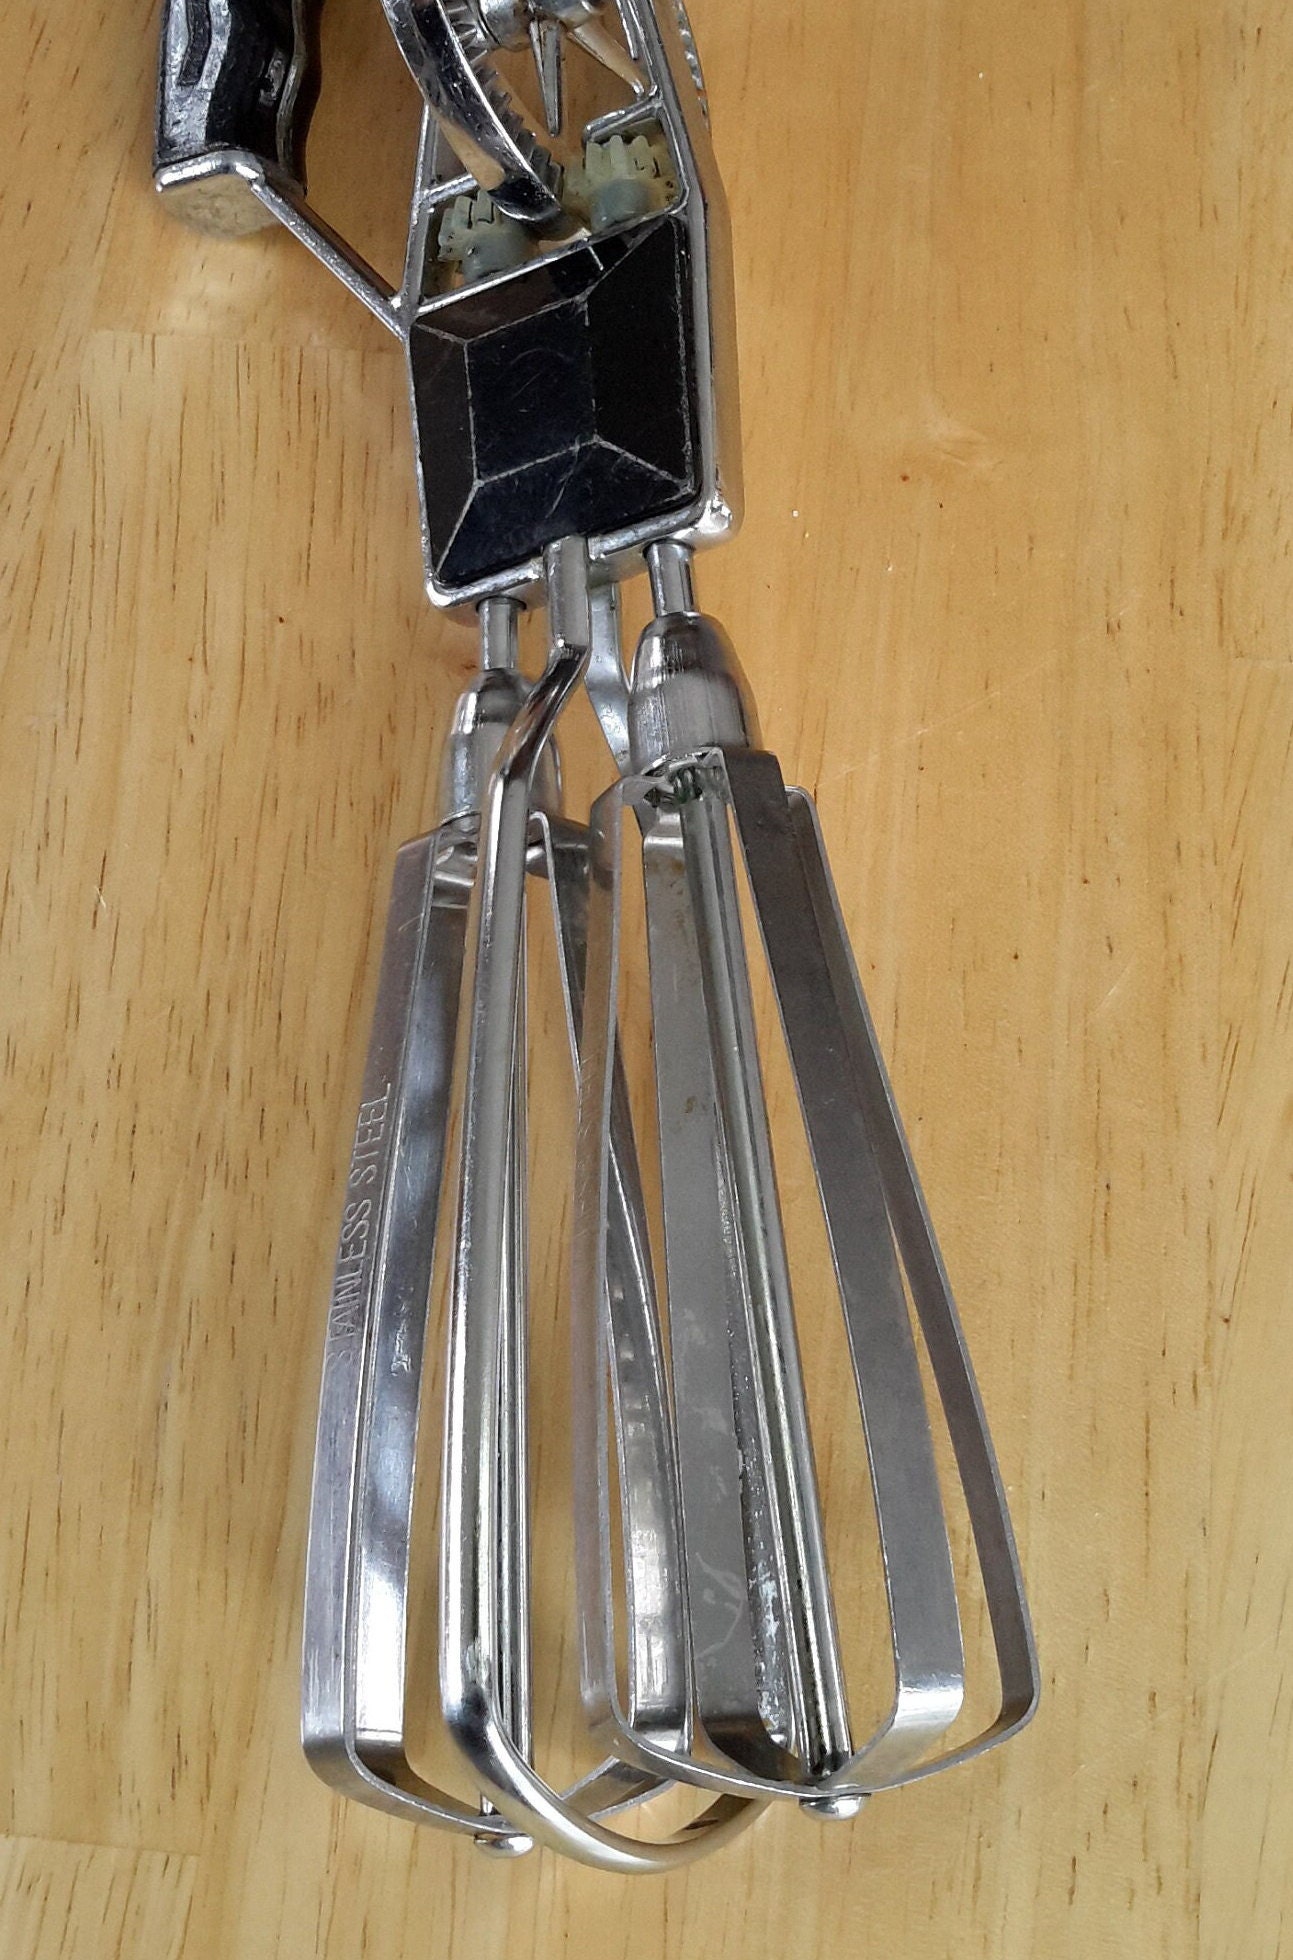 Vintage Egg Beaters Manual Hand Crank Mixer. They Really Whirl Your Choice  of Two Different Mid-century Whisk Batter Beater Whipper Upper 